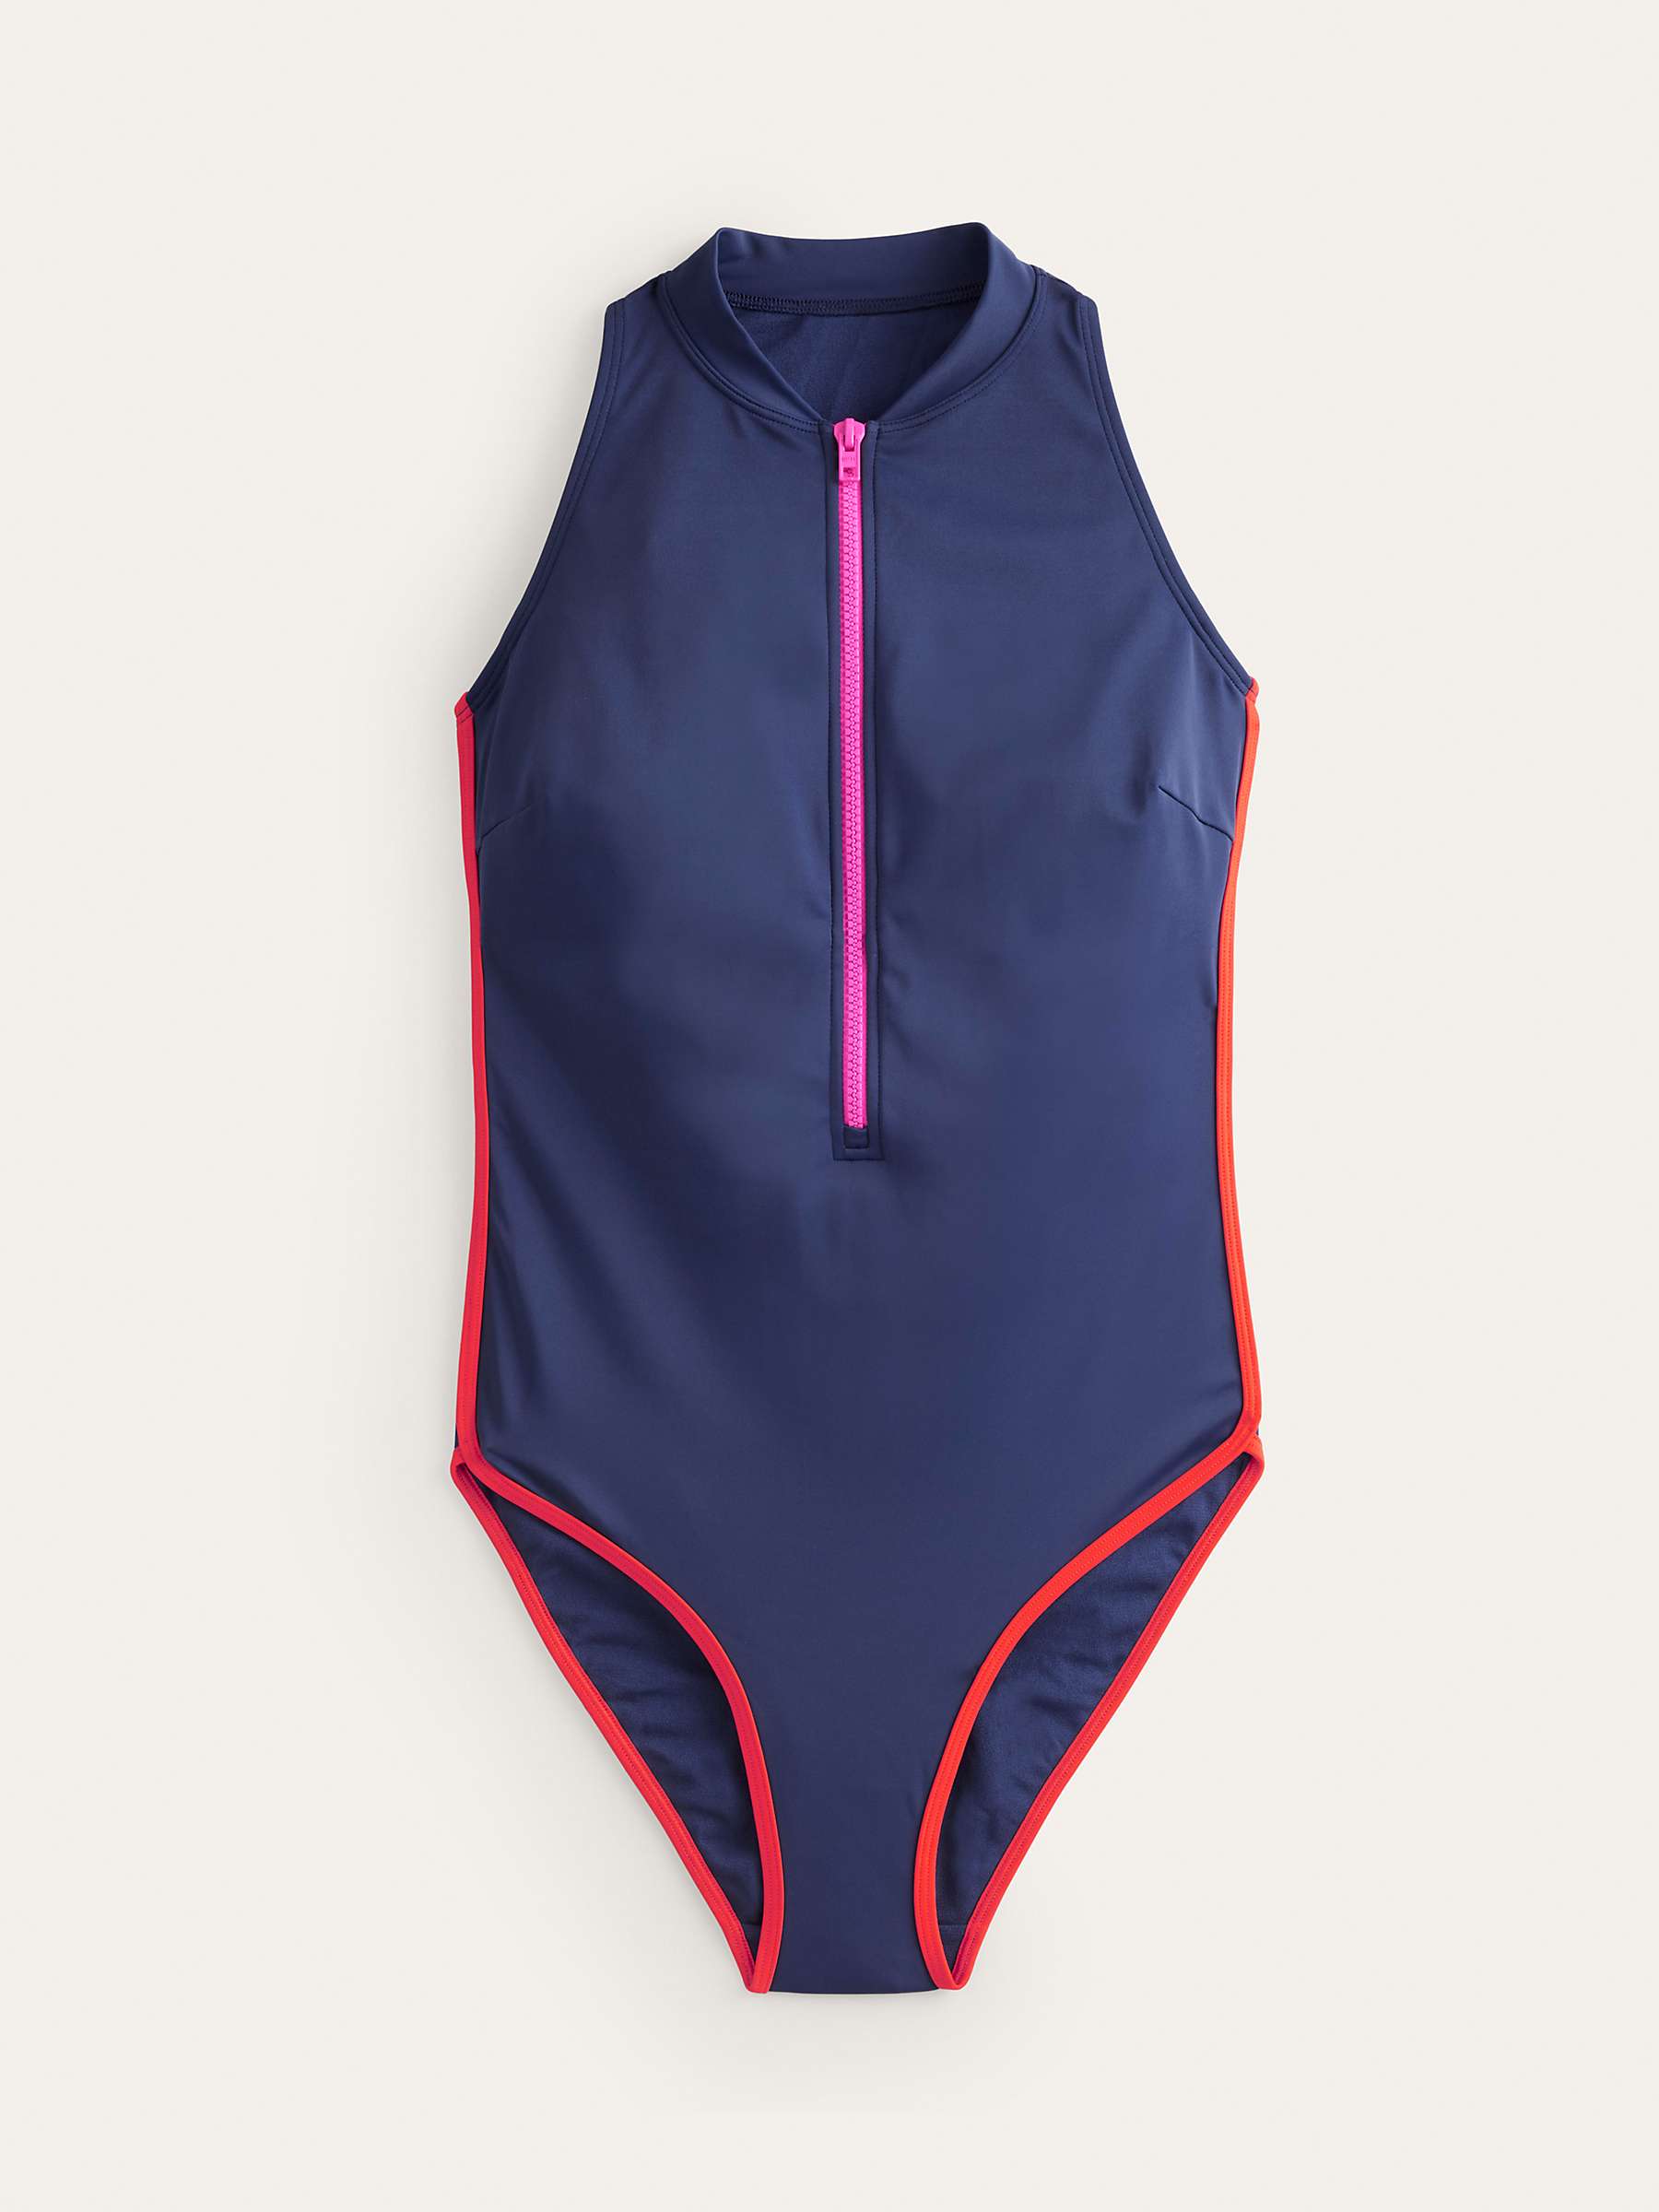 Buy Boden Piped Sporty Swimsuit, Navy/Super Pink Online at johnlewis.com